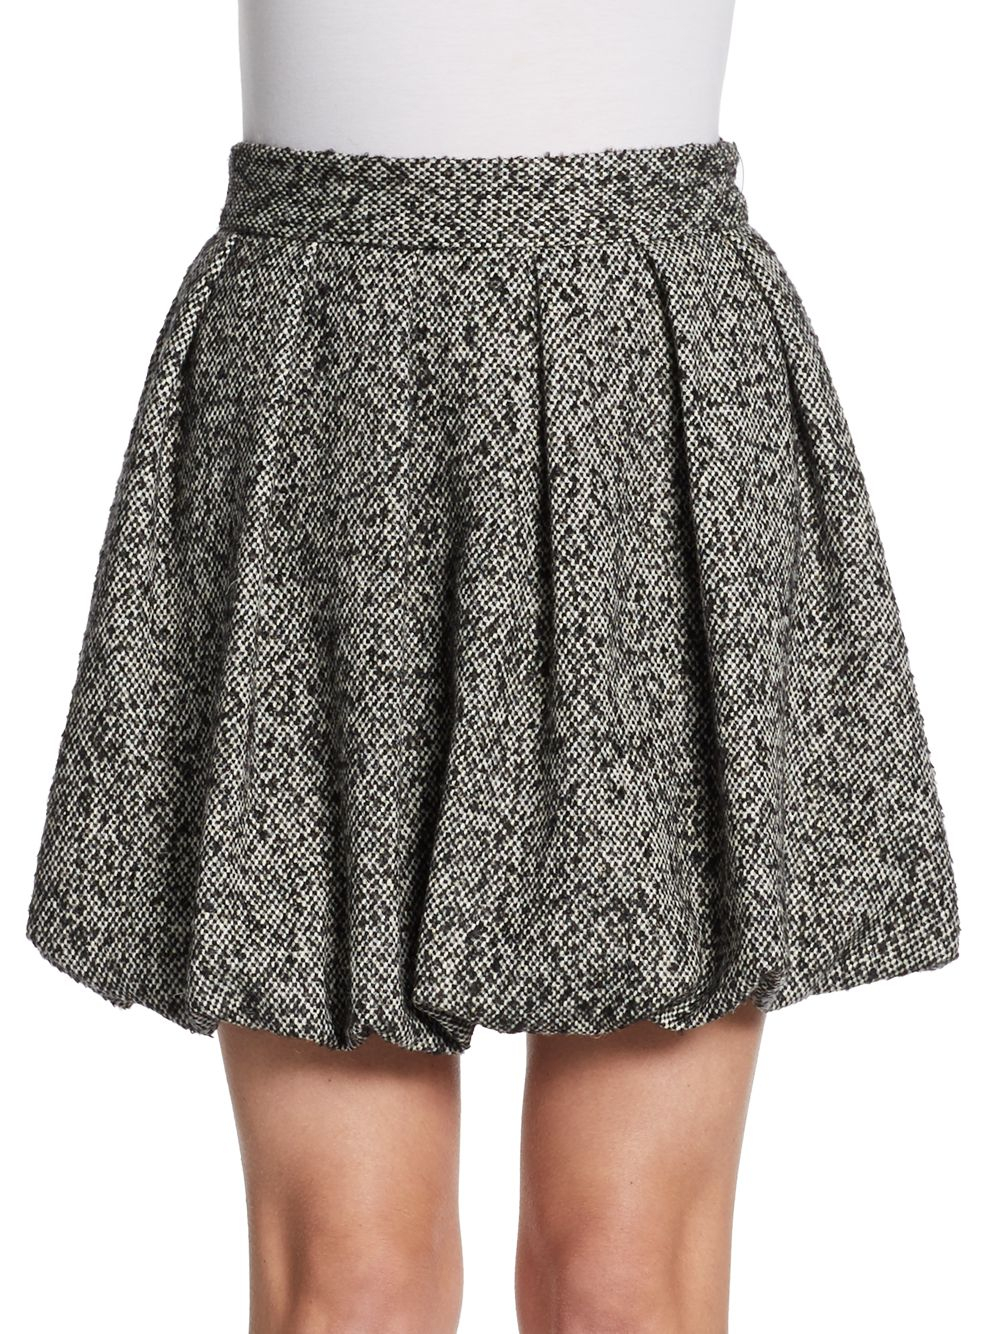 Lyst - Alice + Olivia Roni Bubble Skirt in White